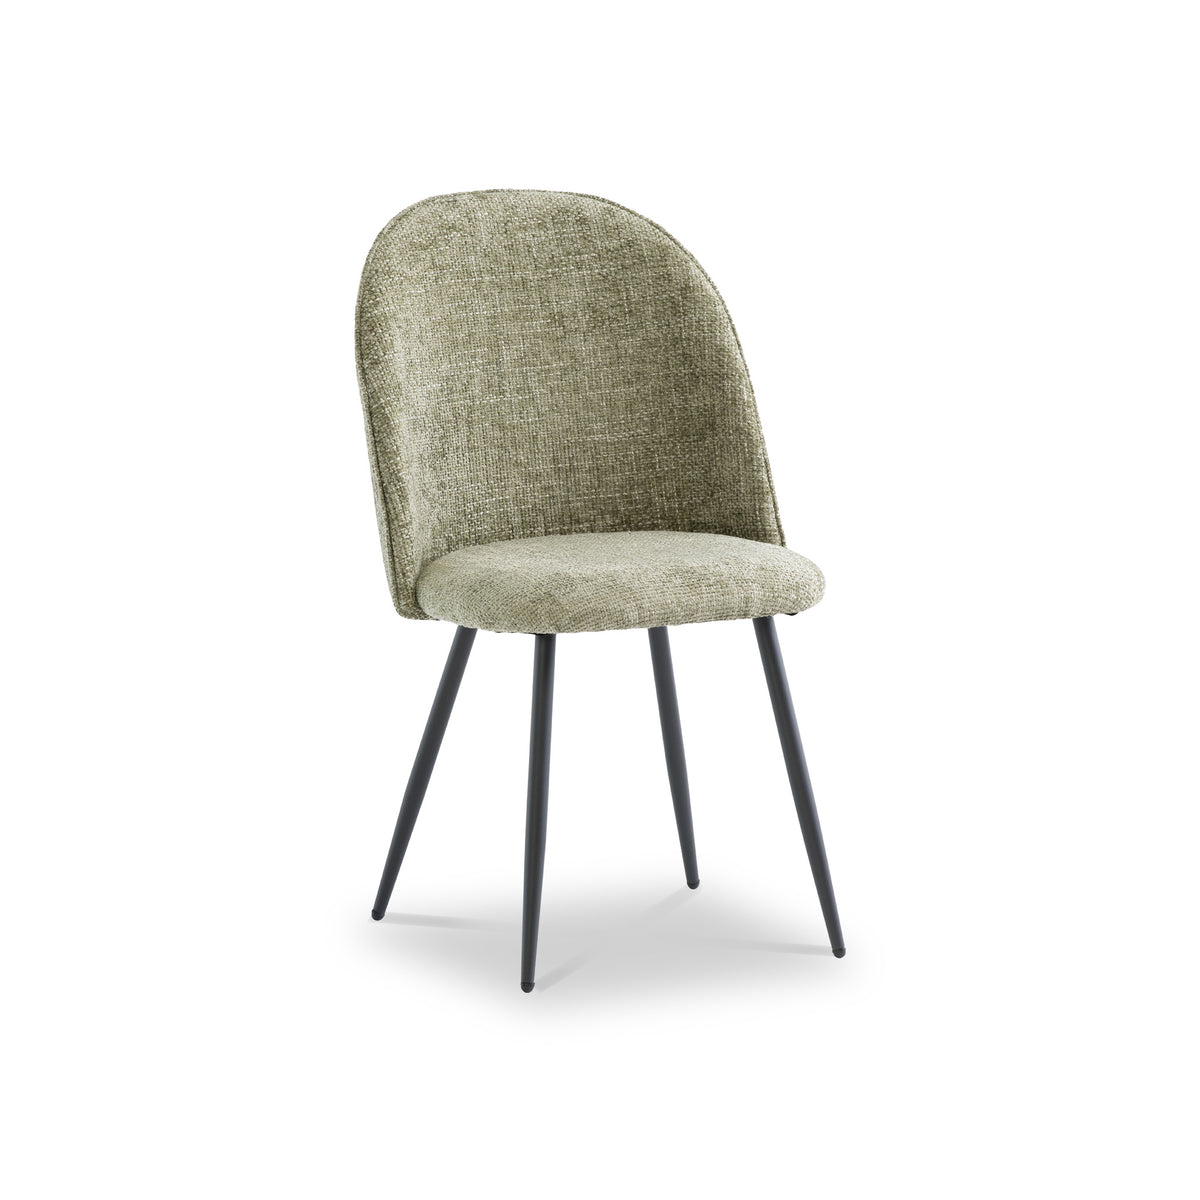 Fern Olive Dining Chair by Roseland Furniture